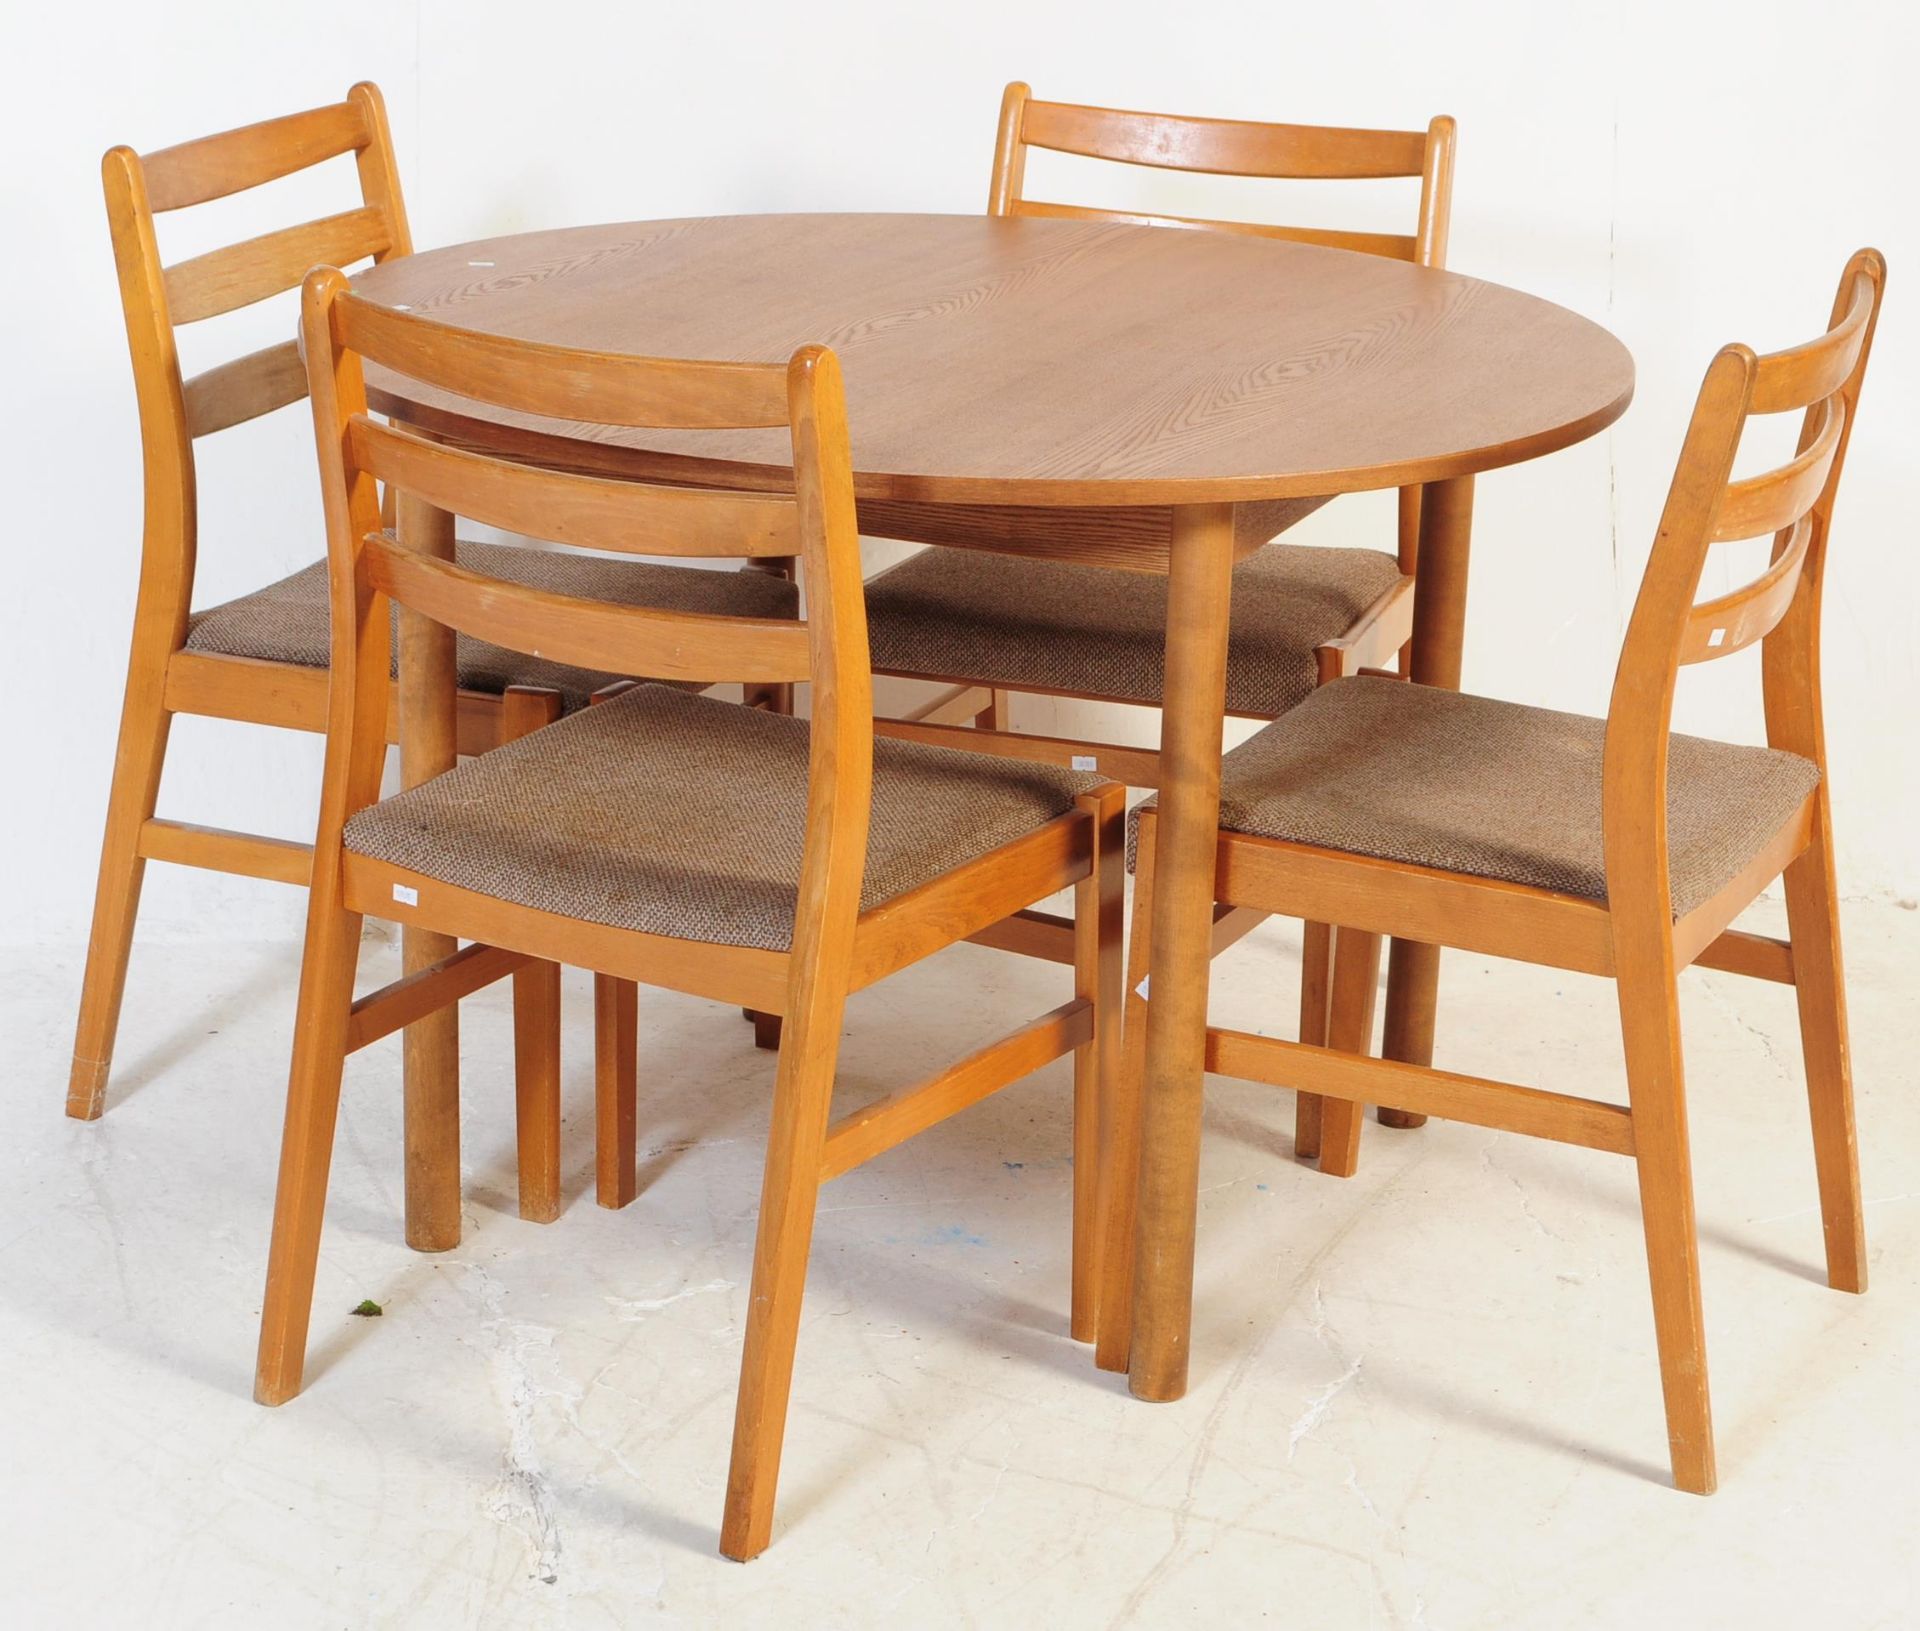 RETRO MID 20TH CENTURY TEAK DINING TABLE WITH CHAIRS - Image 2 of 6